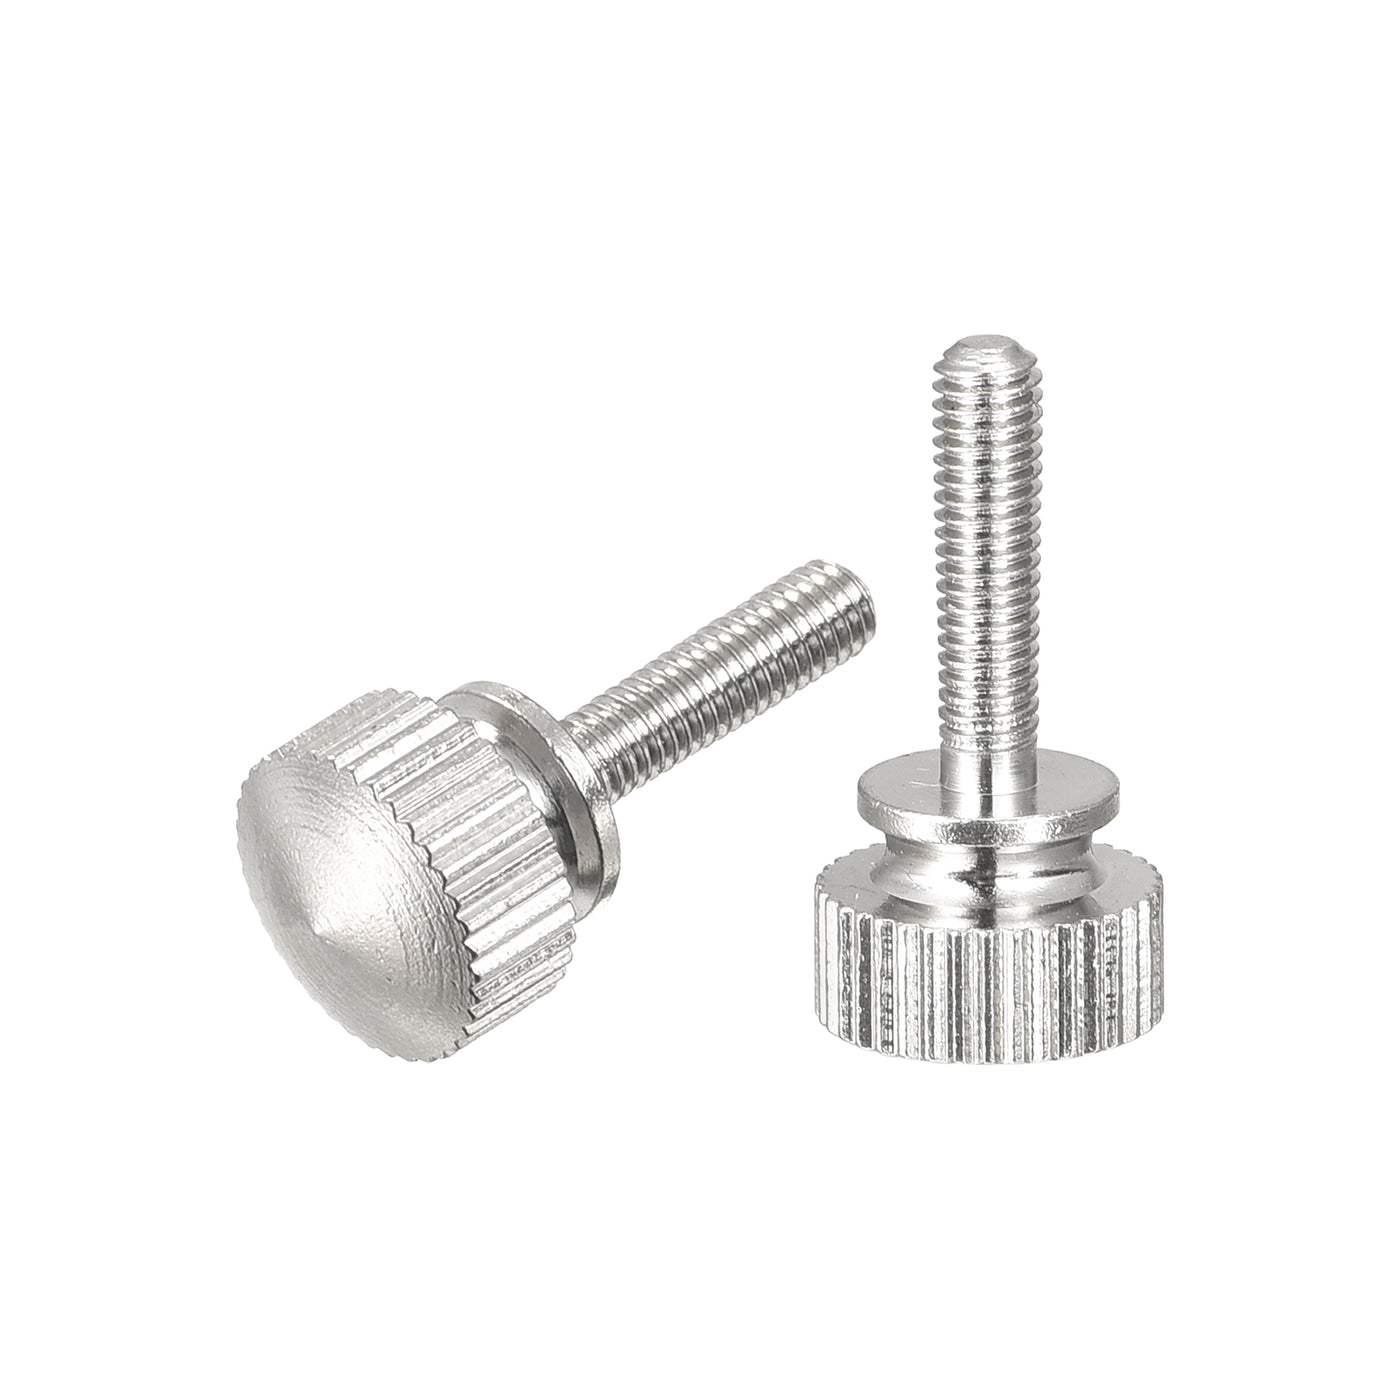 uxcell Uxcell Knurled Thumb Screws, M3x12mm Brass Shoulder Bolts Grip Knobs Fasteners, Nickel Plated 2Pcs